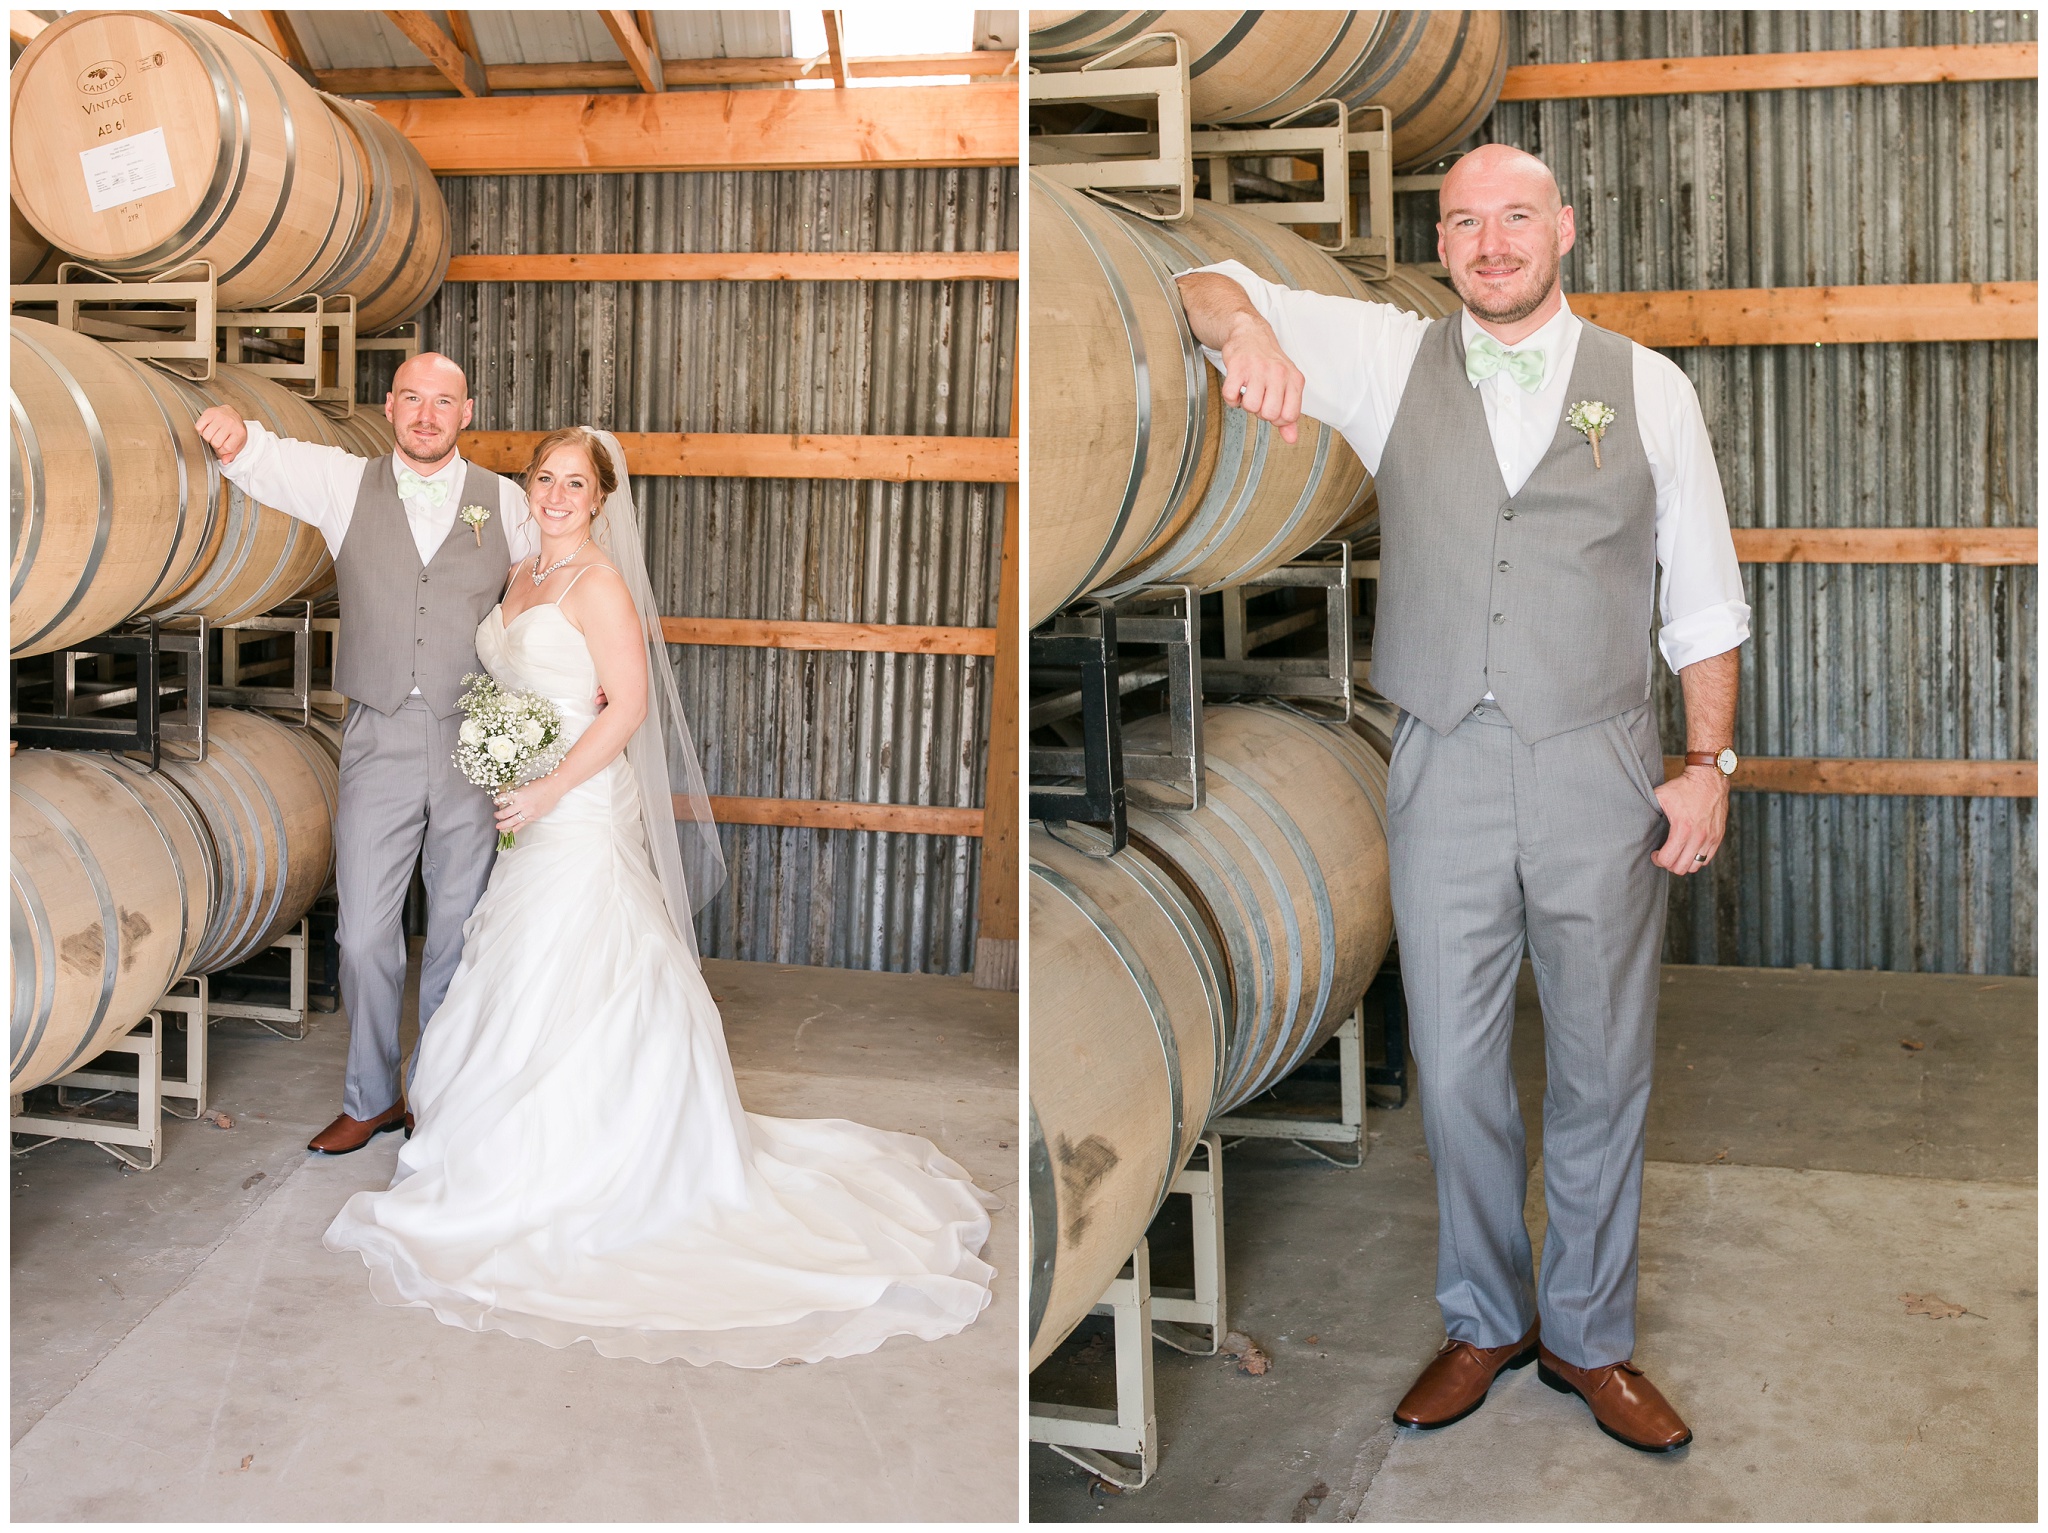 New Hampshire Wedding Photographer | Amy Brown Photography | Flag Hill Winery Lee NH Wedding 